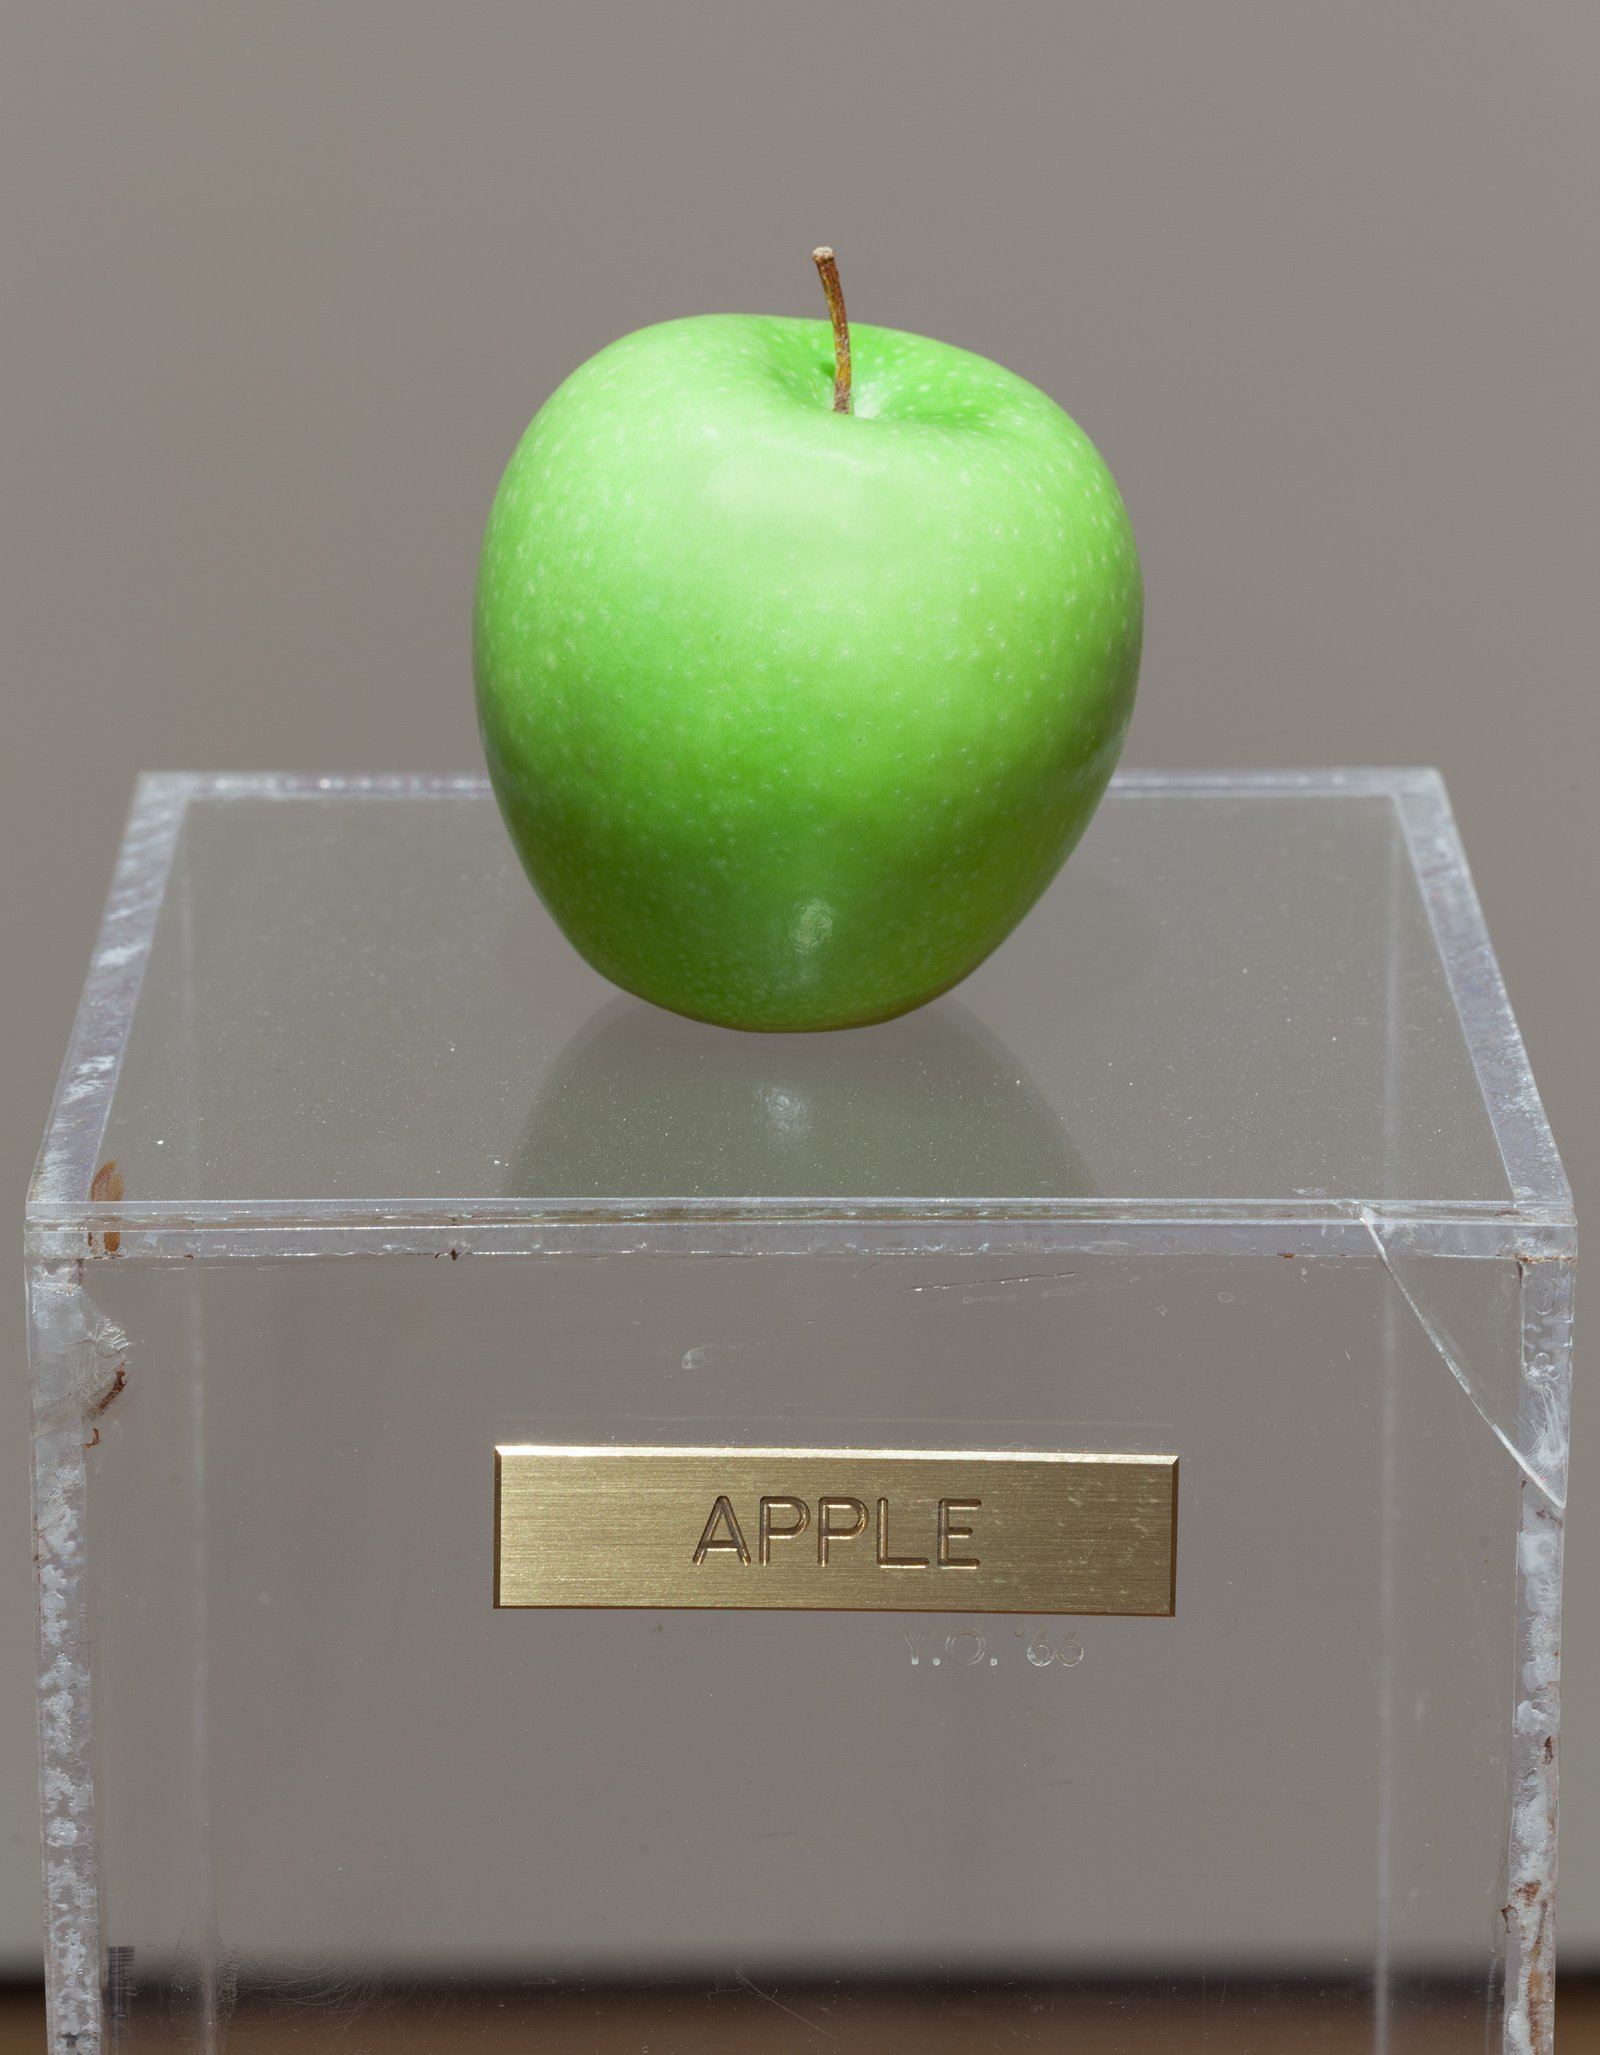 4.Installation view of Apple 1966 from Yoko Ono_ One Woman Show, 1960-1971, MoMA, NYC, 2015. Photo © Thomas Griesel.jpg